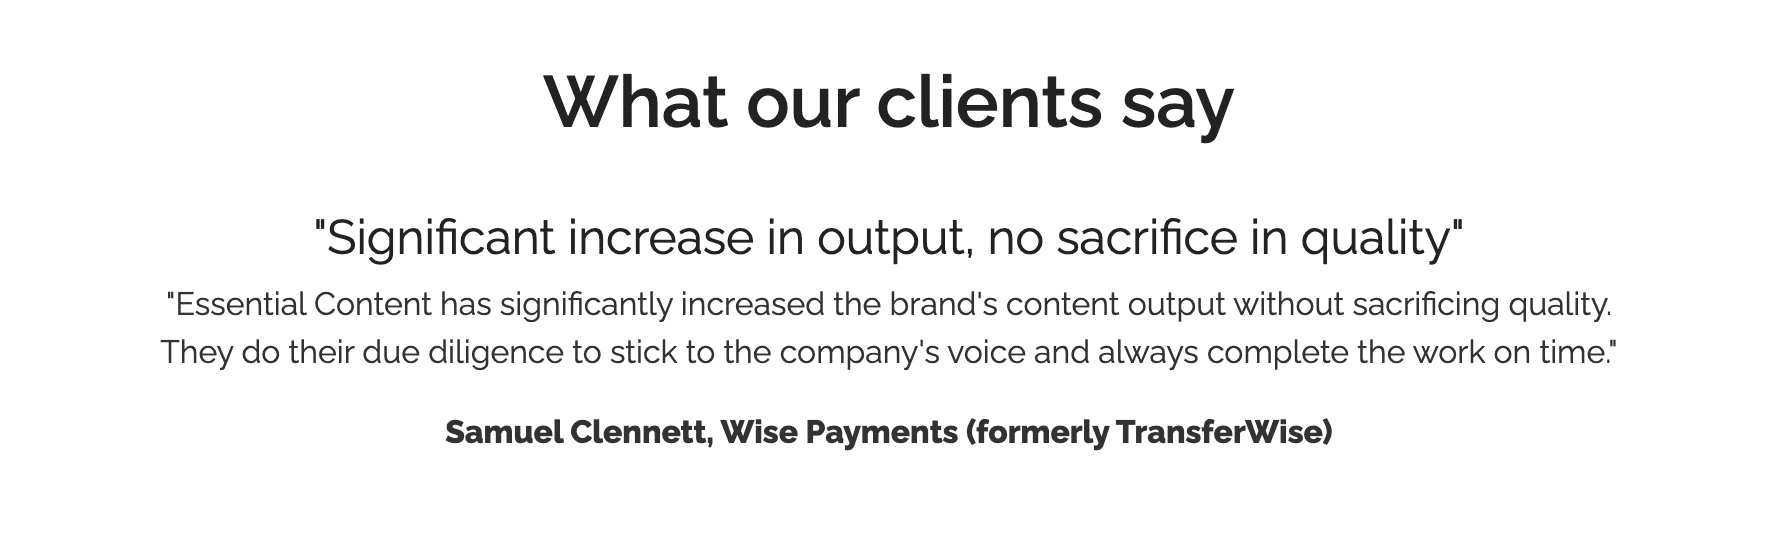 Screenshot of quote from a financial services client. Quote reads: "Significant increase in output, no sacrifice in quality" "Essential Content has significantly increased the brand's content output without sacrificing quality. They do their due diligence to stick to the company's voice and always complete the work on time." Samuel Clennett, Wise Payments (formerly TransferWise)